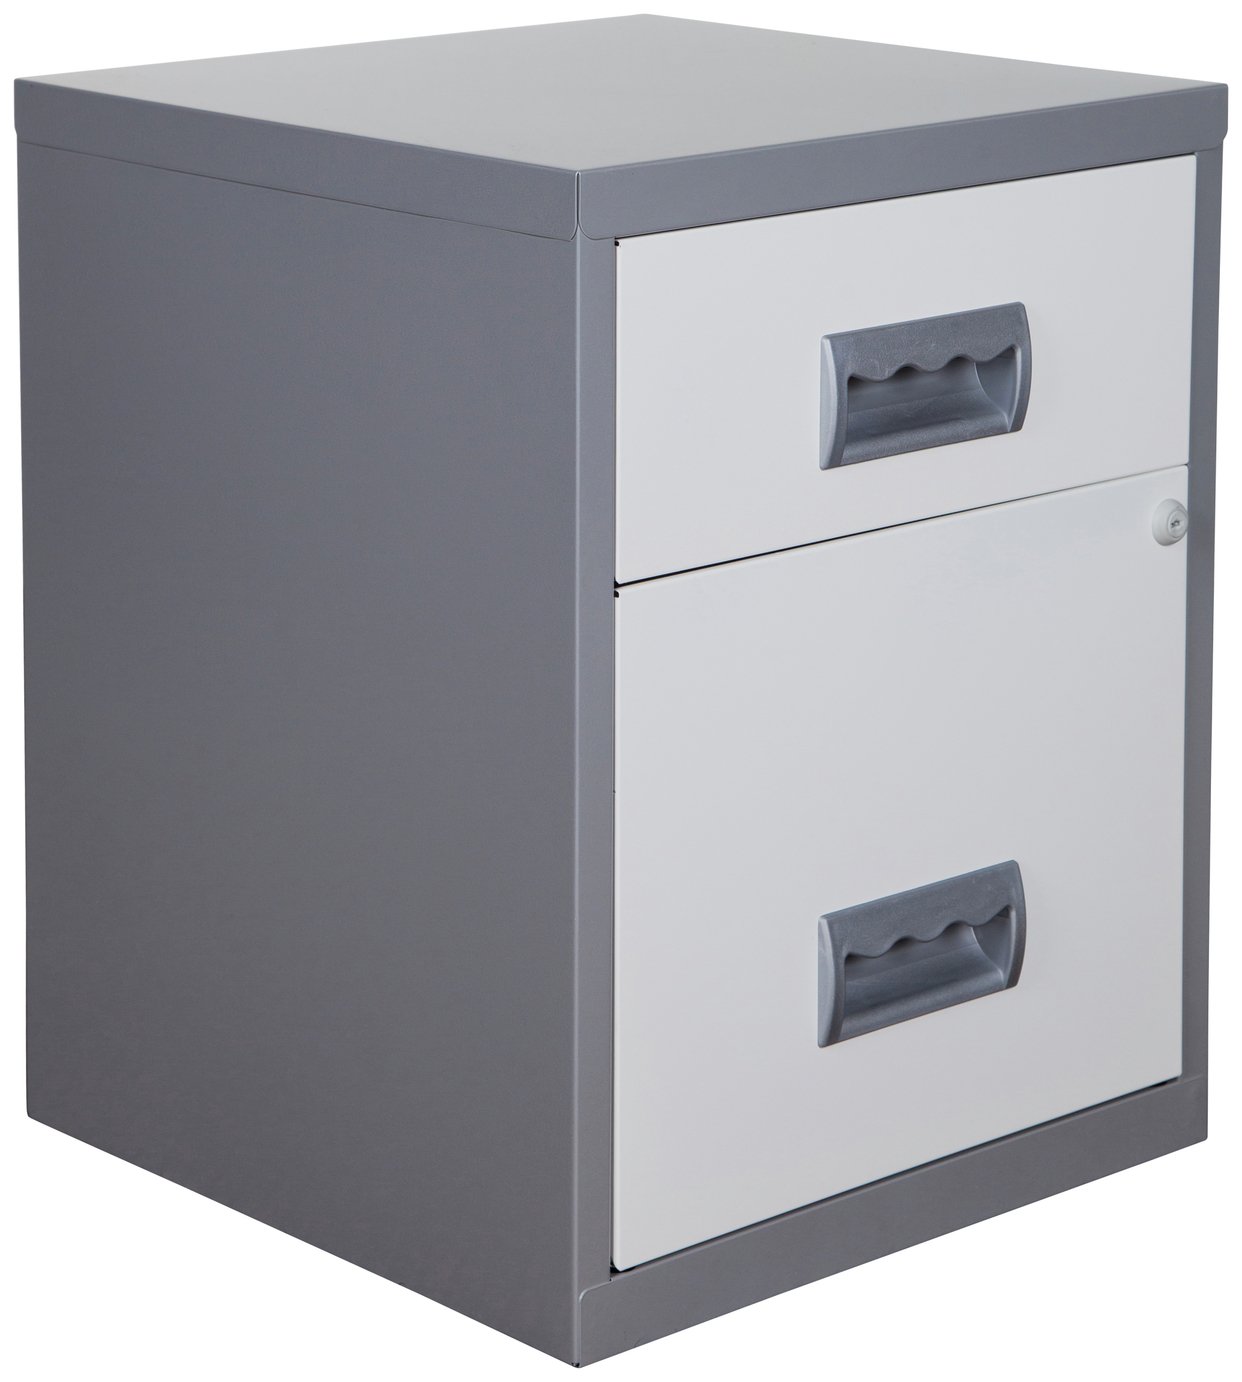 Pierre Henry 2 Drawer Combi Filing Cabinet - Silver/White